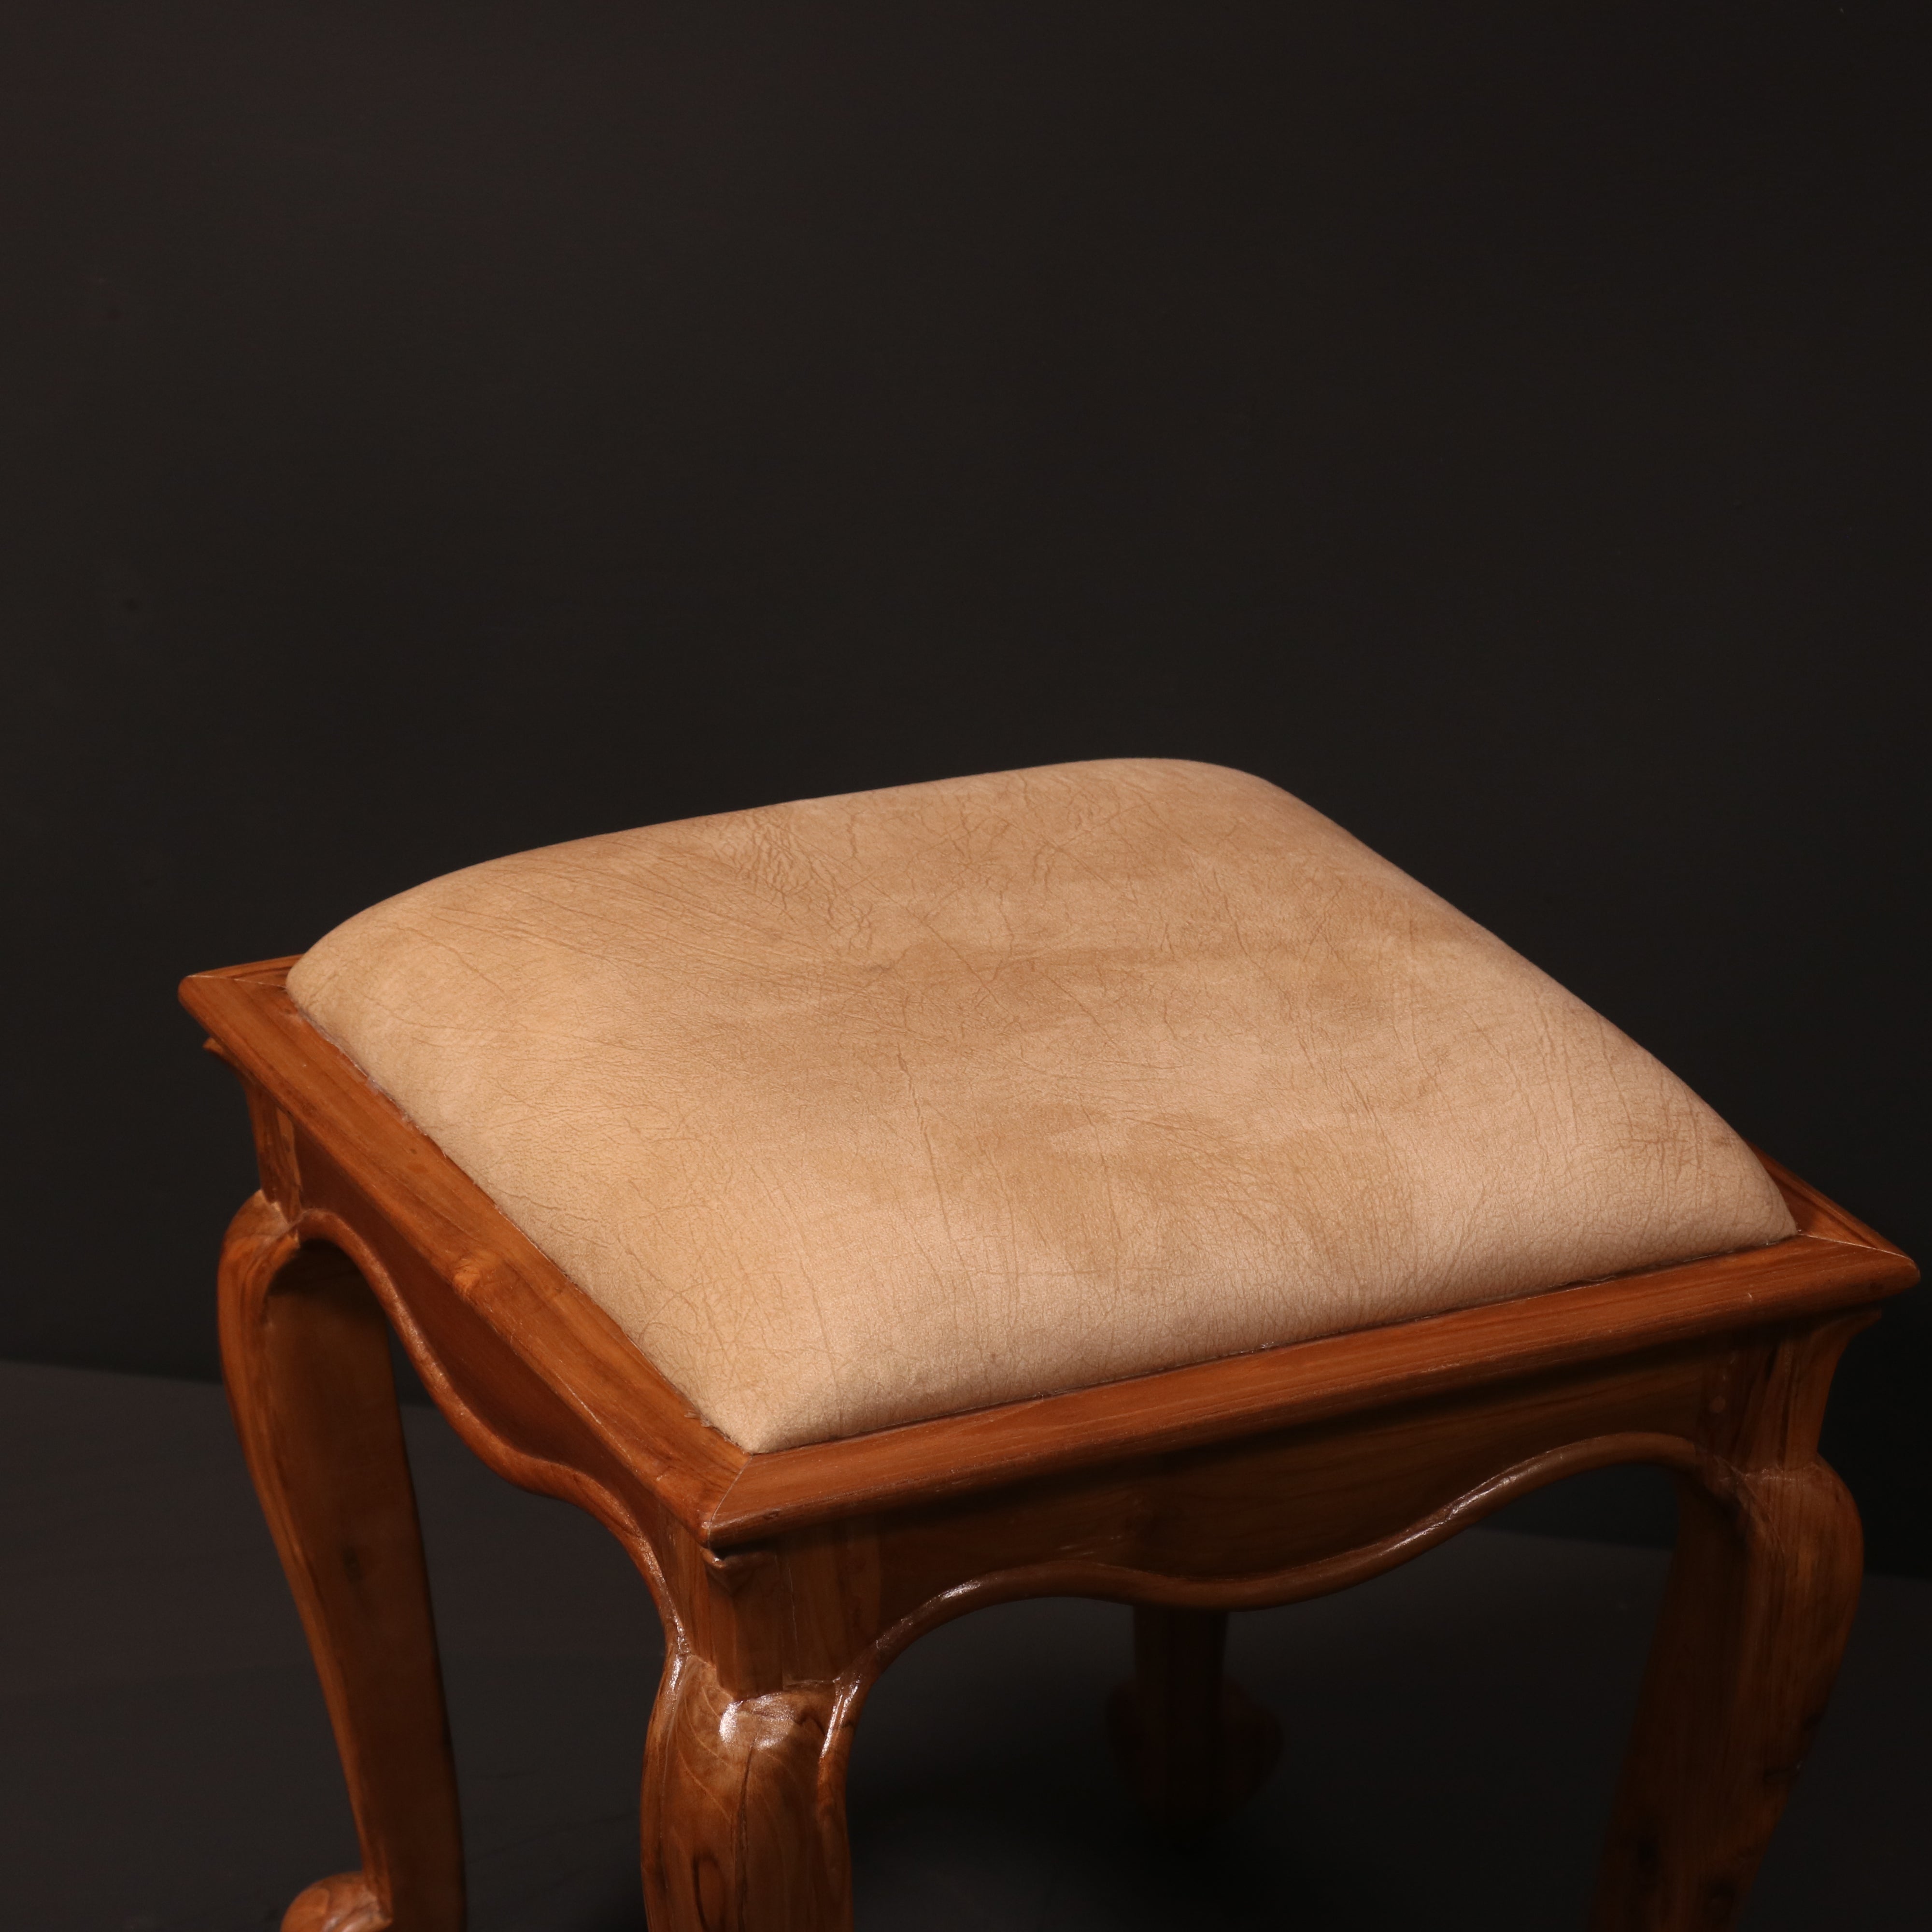 Classic Wooden Carved Stool Stool